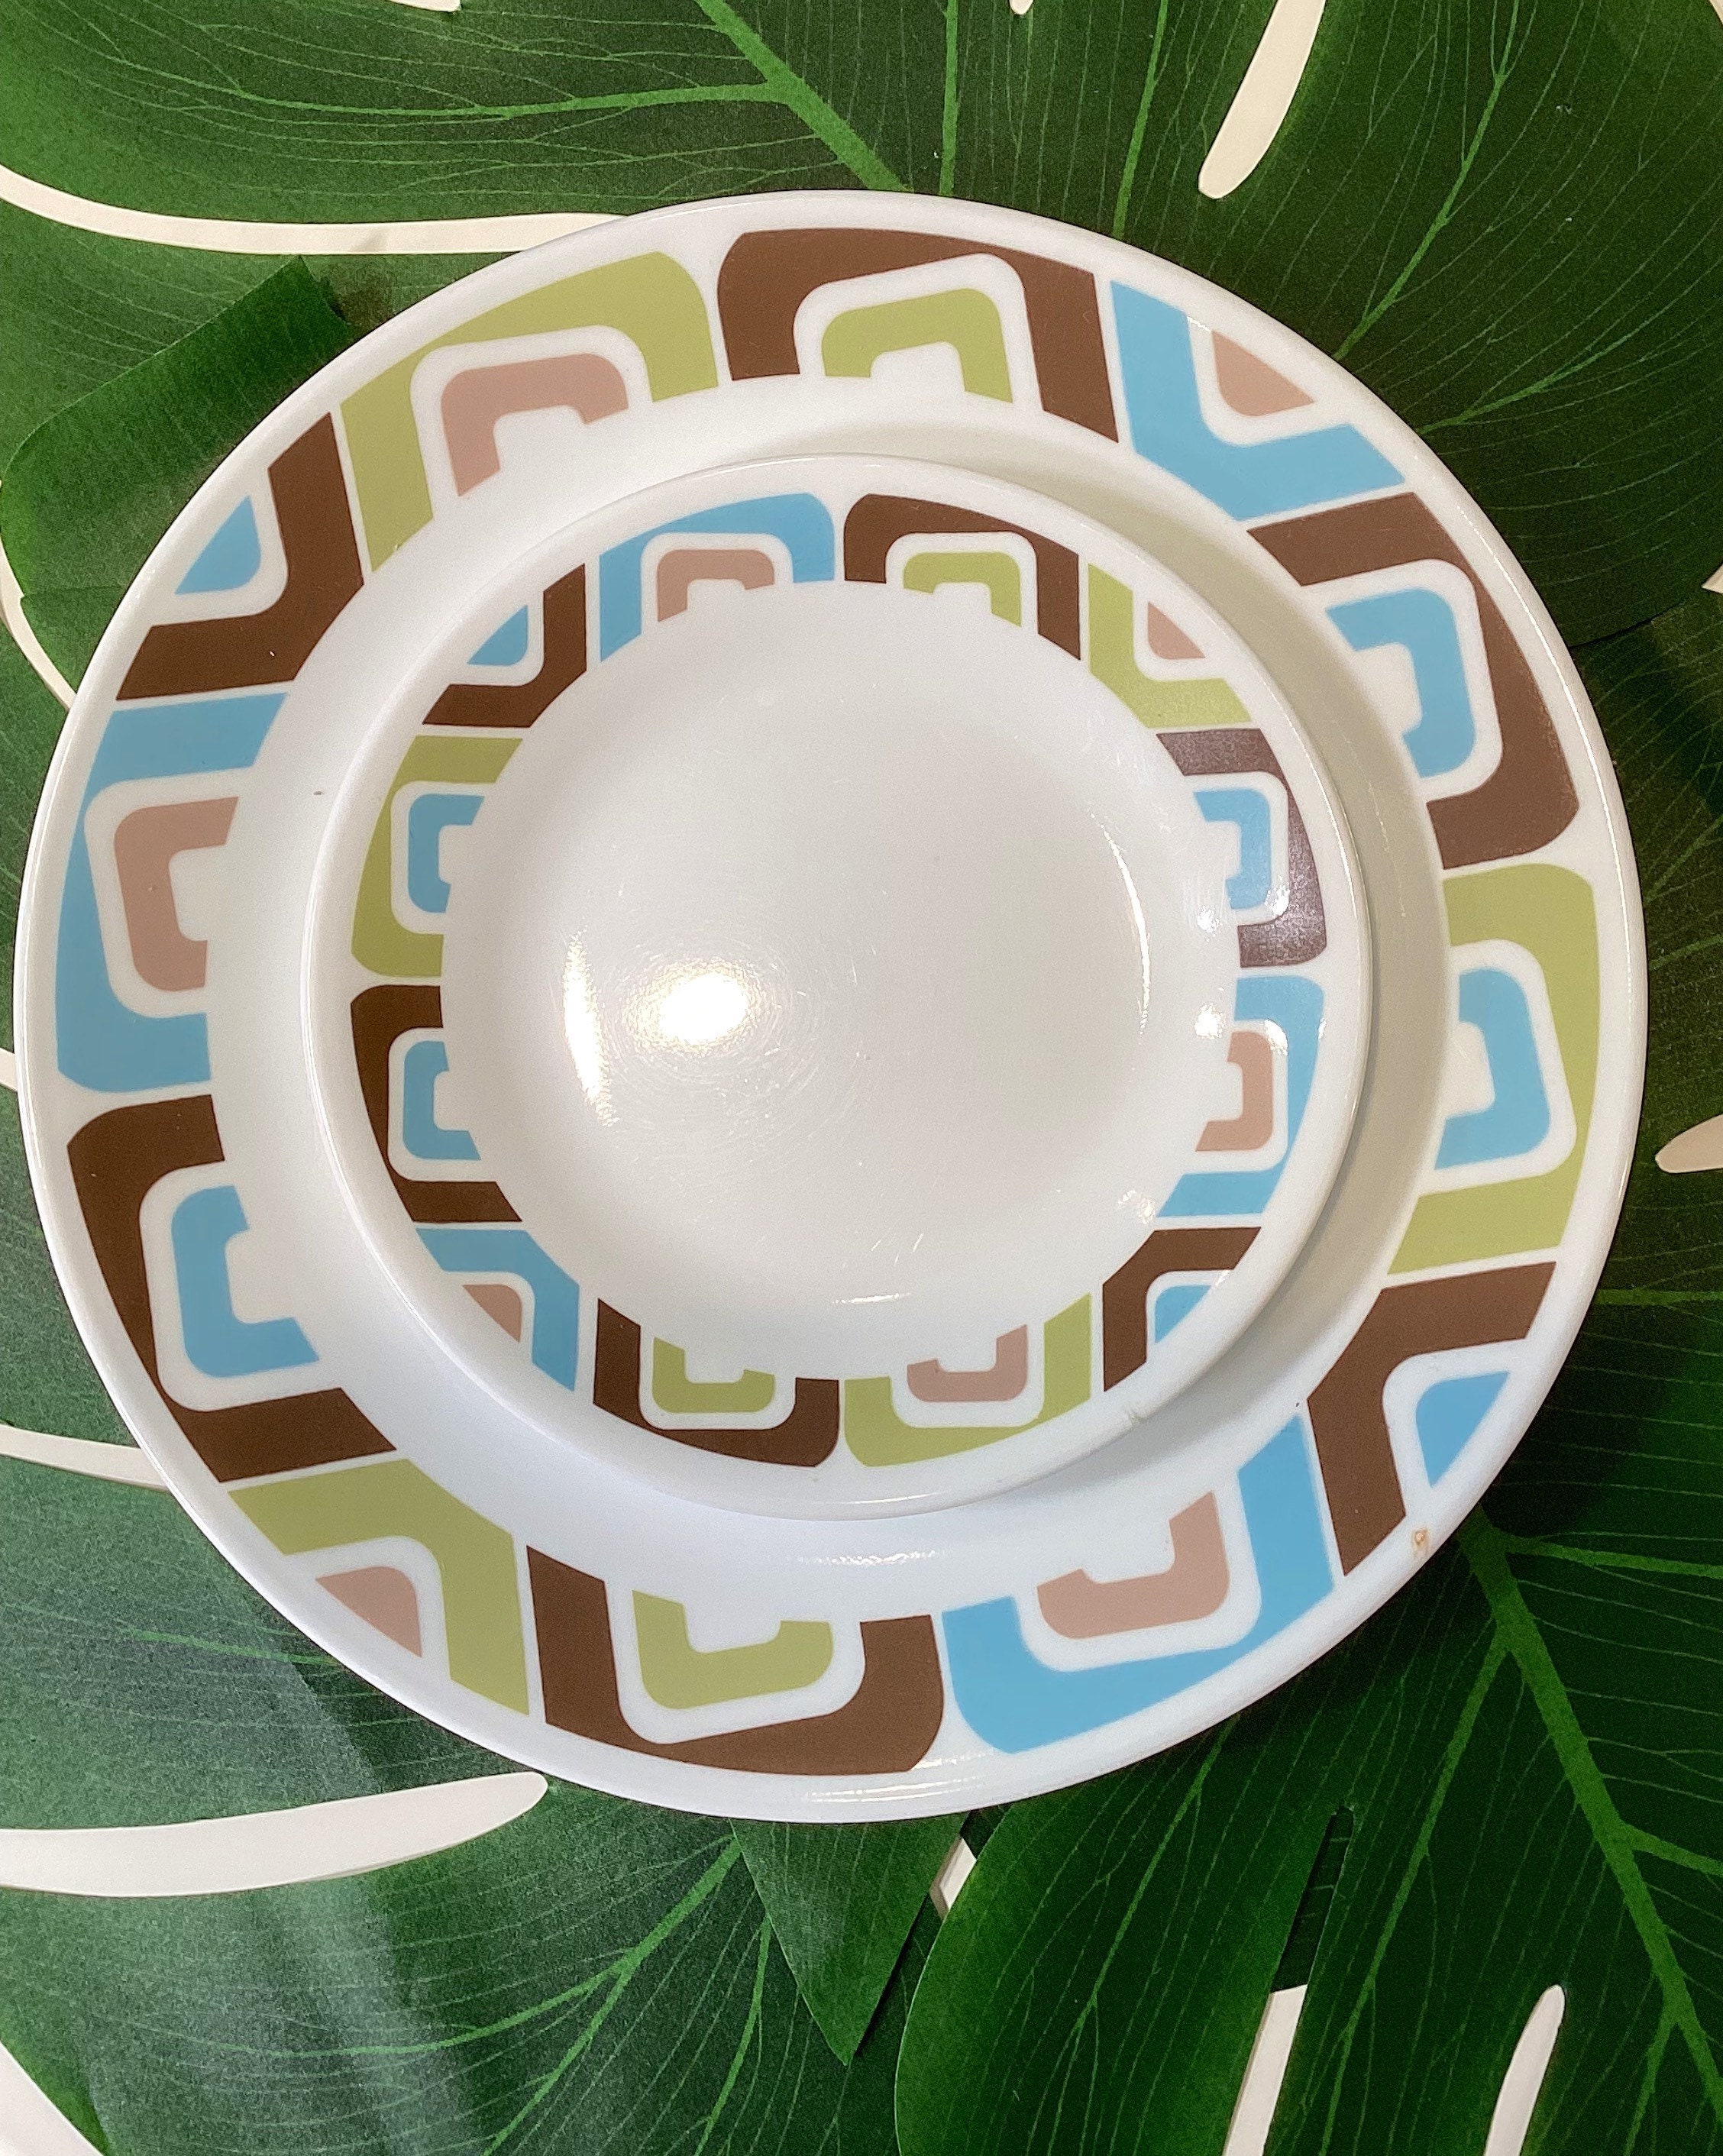 Corelle Woodland Leaves Dinner Plate (2) Brown Tan Green Tan Leaves Camo  10.75